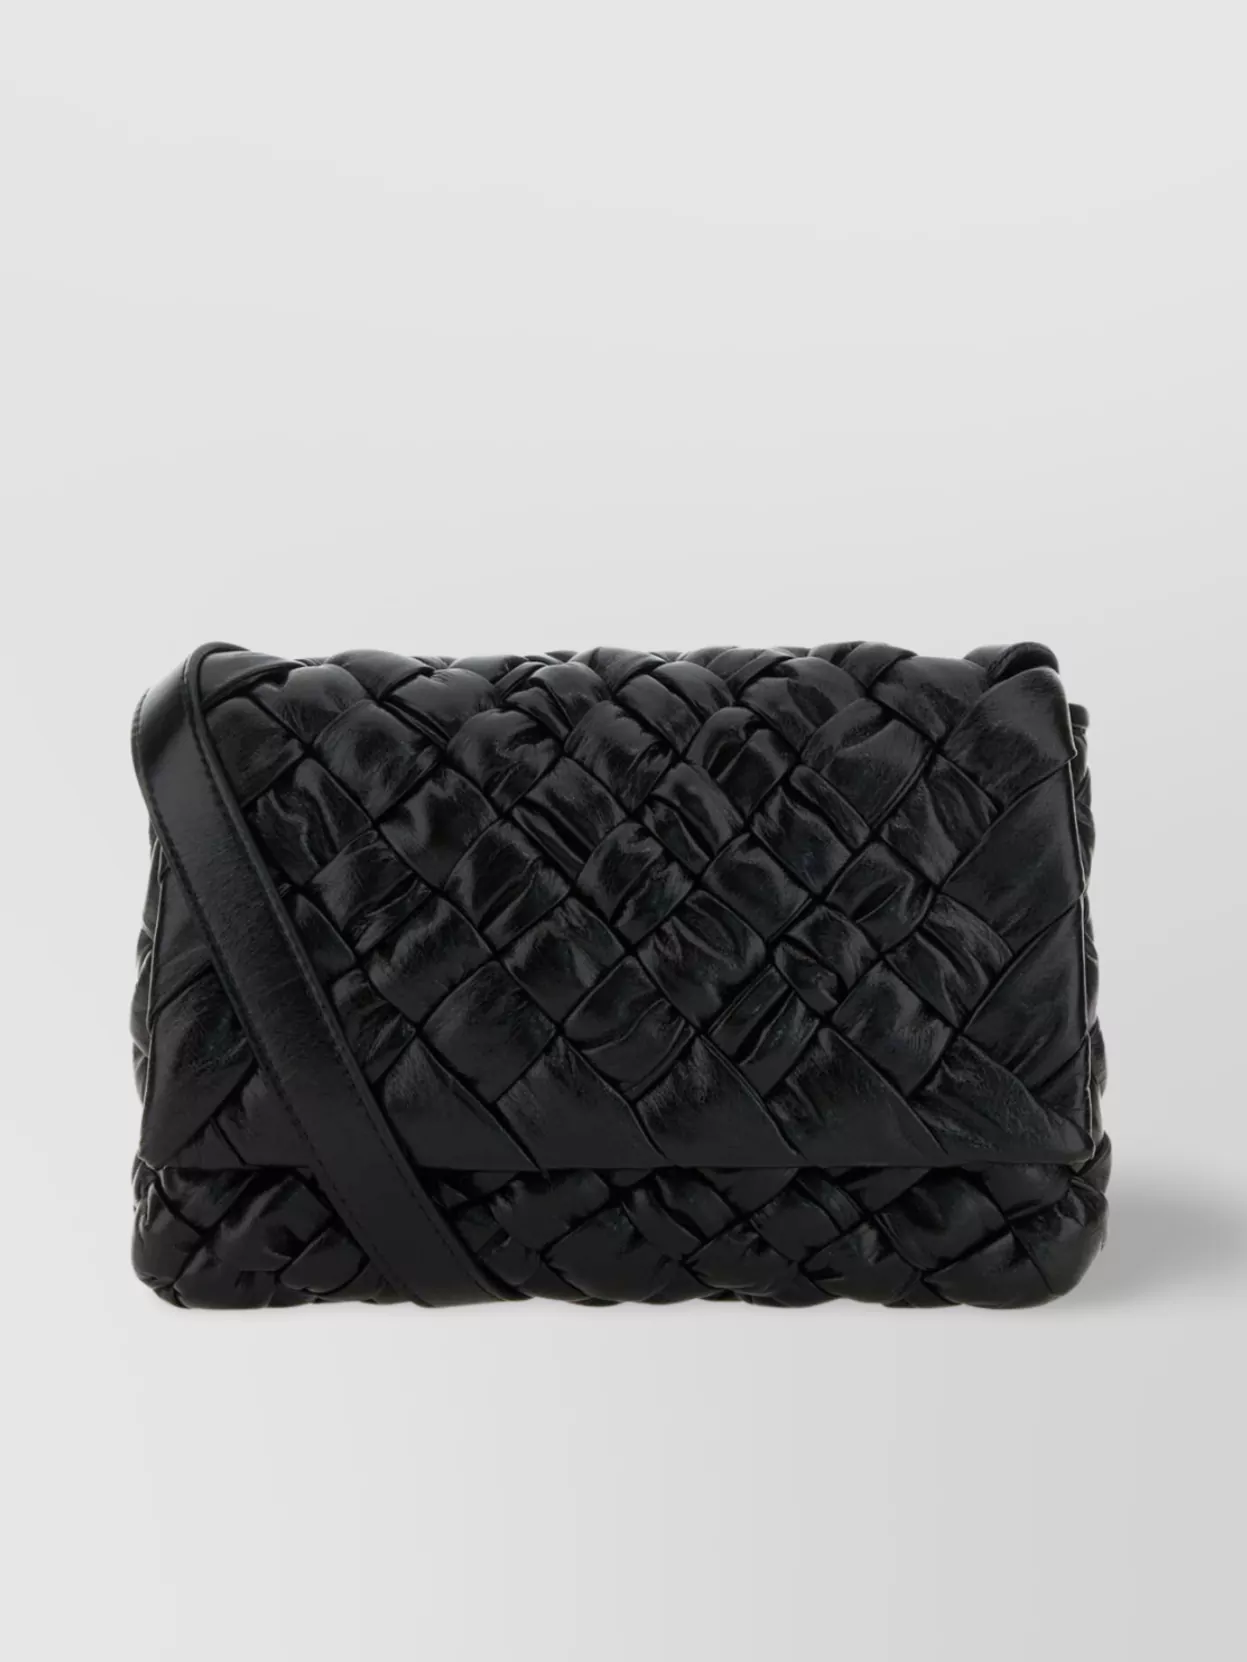 Shop Bottega Veneta Leather Crossbody Bag With Chain Strap And Quilted Design